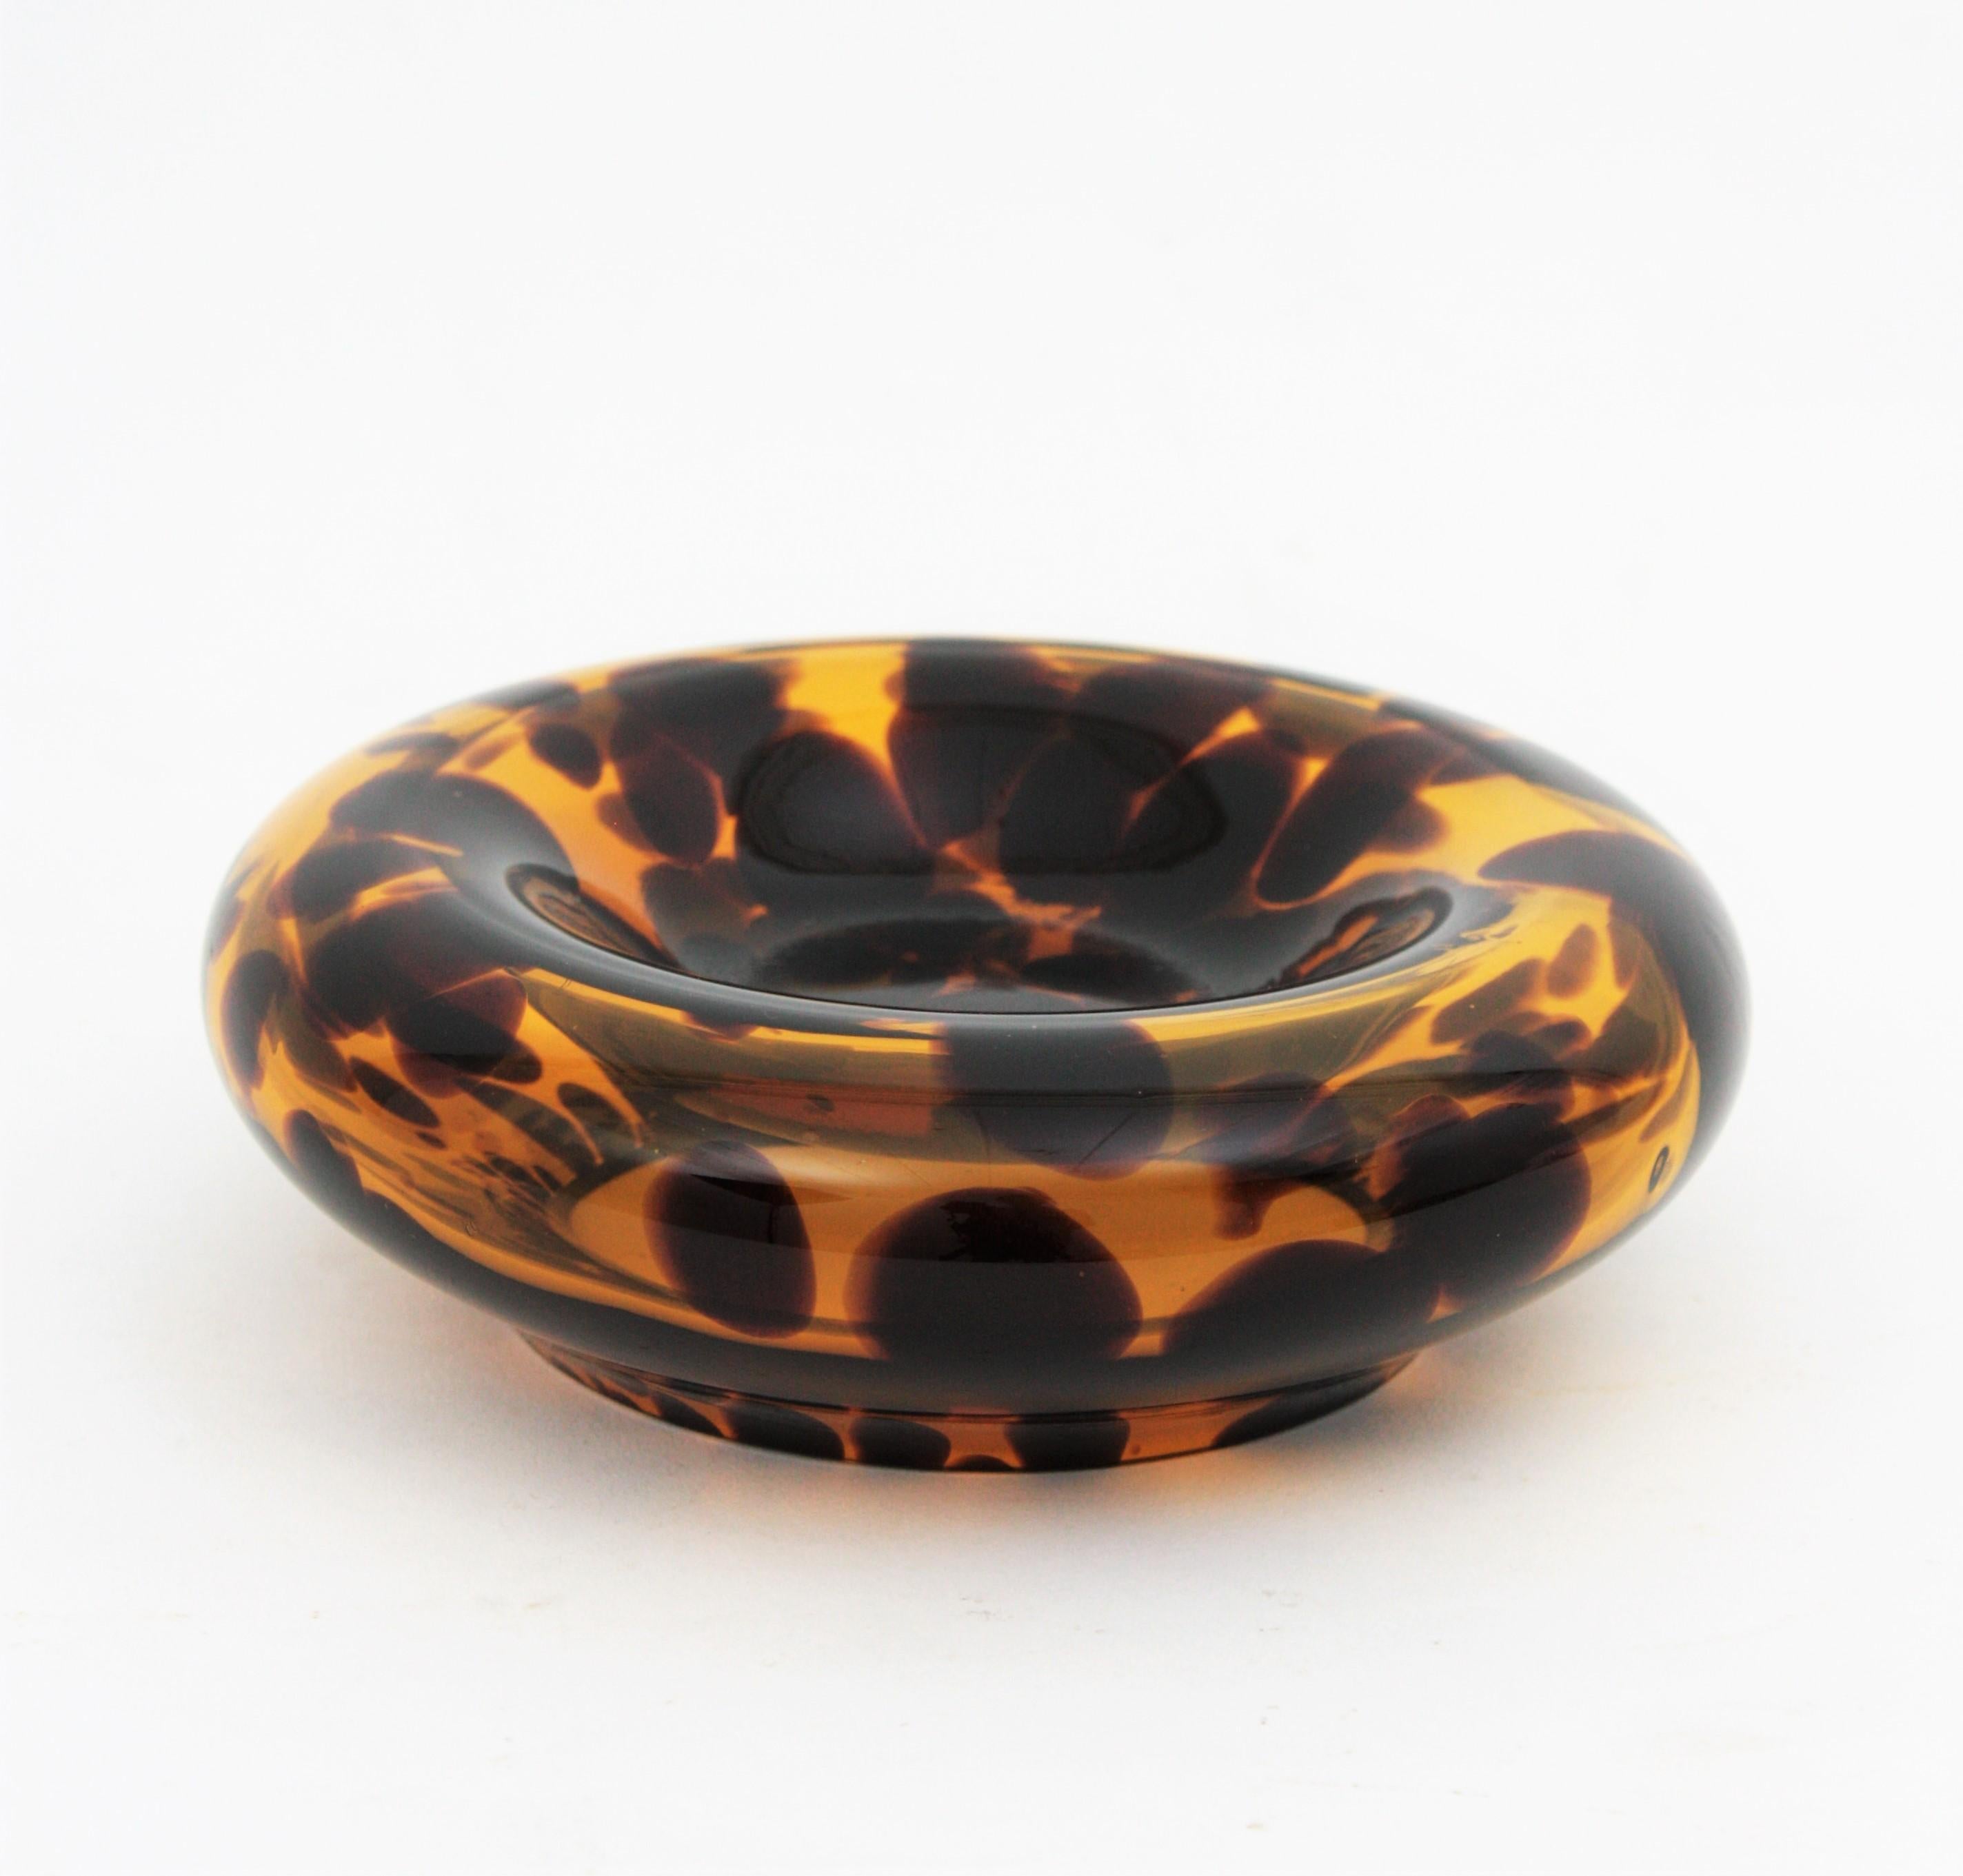 Beautiful hand blown tortoiseshell Empoli glass round bowl or ashtray, Italy, 1960s.
Manufactured by Empoli for Christian Dior Home collection. Mouth-blown with exclusive tortoiseshell color flowing pattern.
It can be used as cigars / cigarrettes